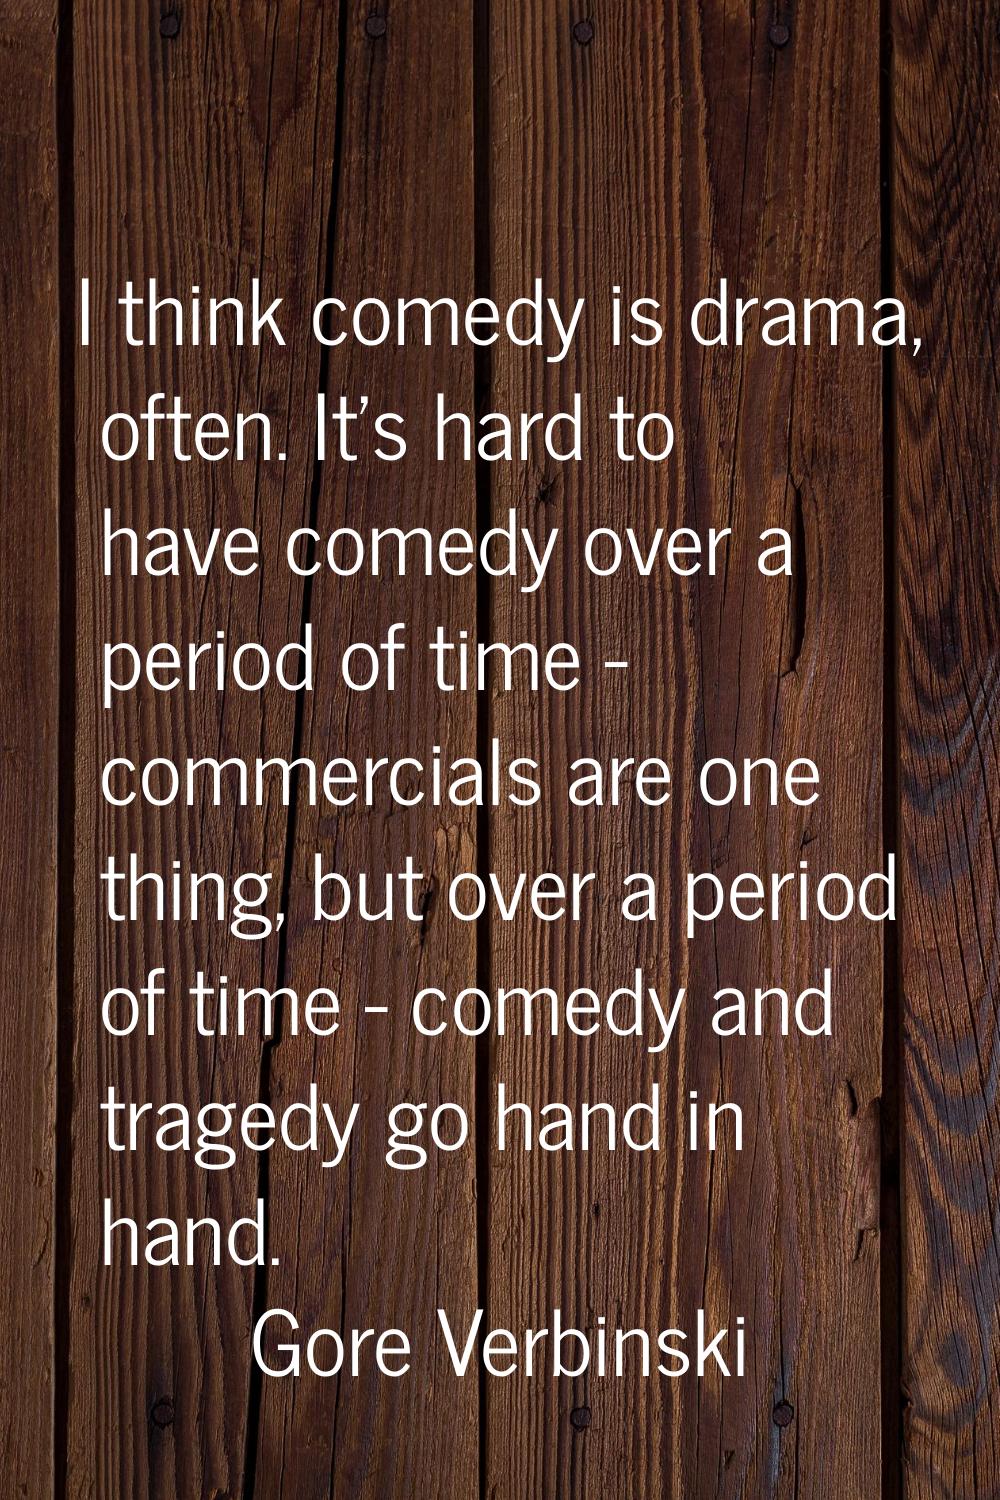 I think comedy is drama, often. It's hard to have comedy over a period of time - commercials are on